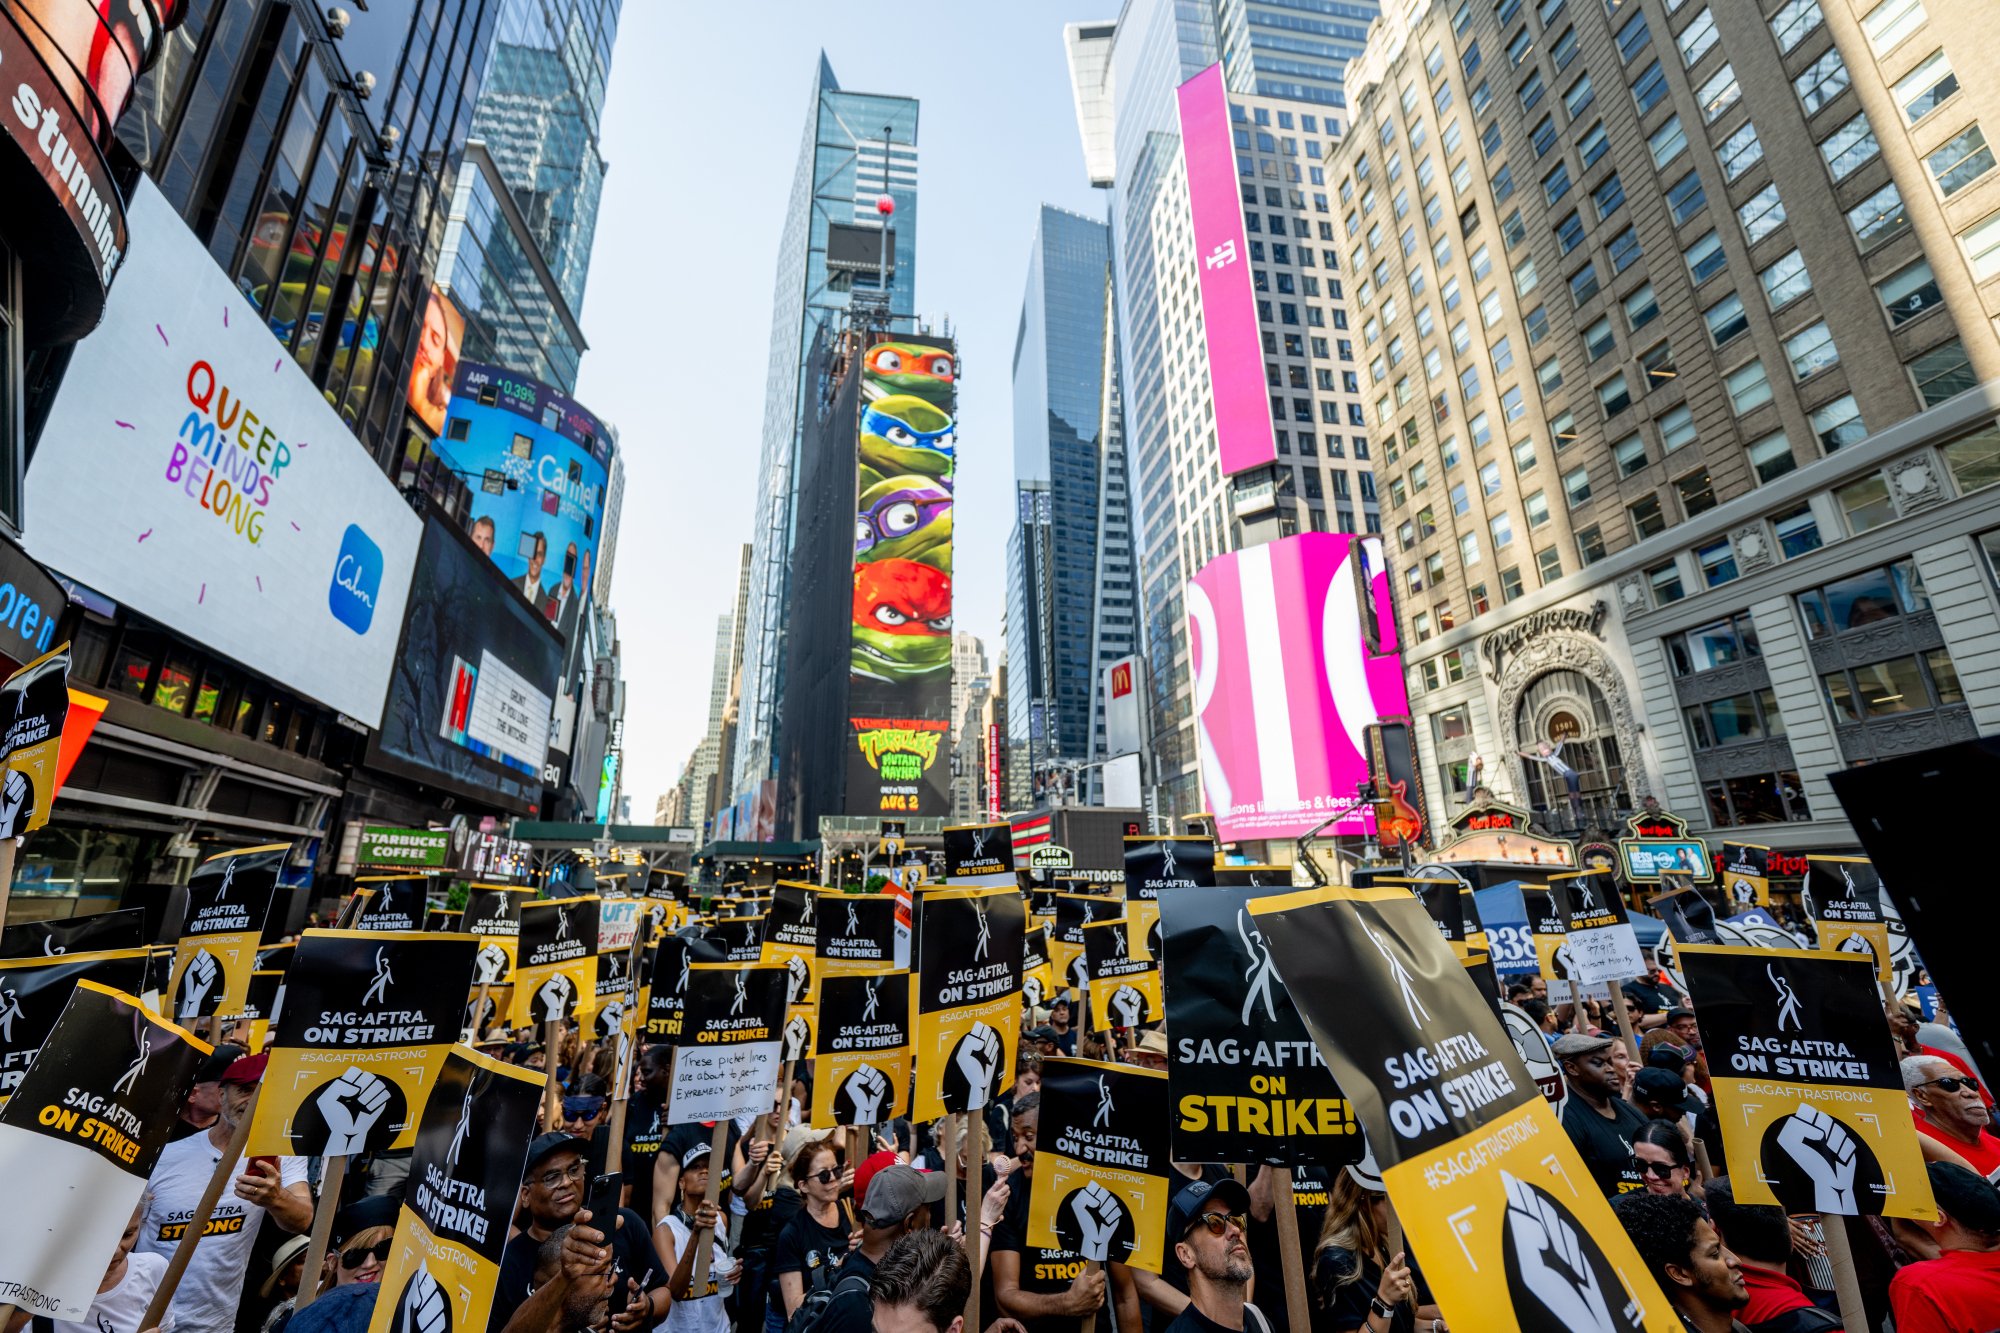 A large crowd of striking writers gather in the middle of Times Square.